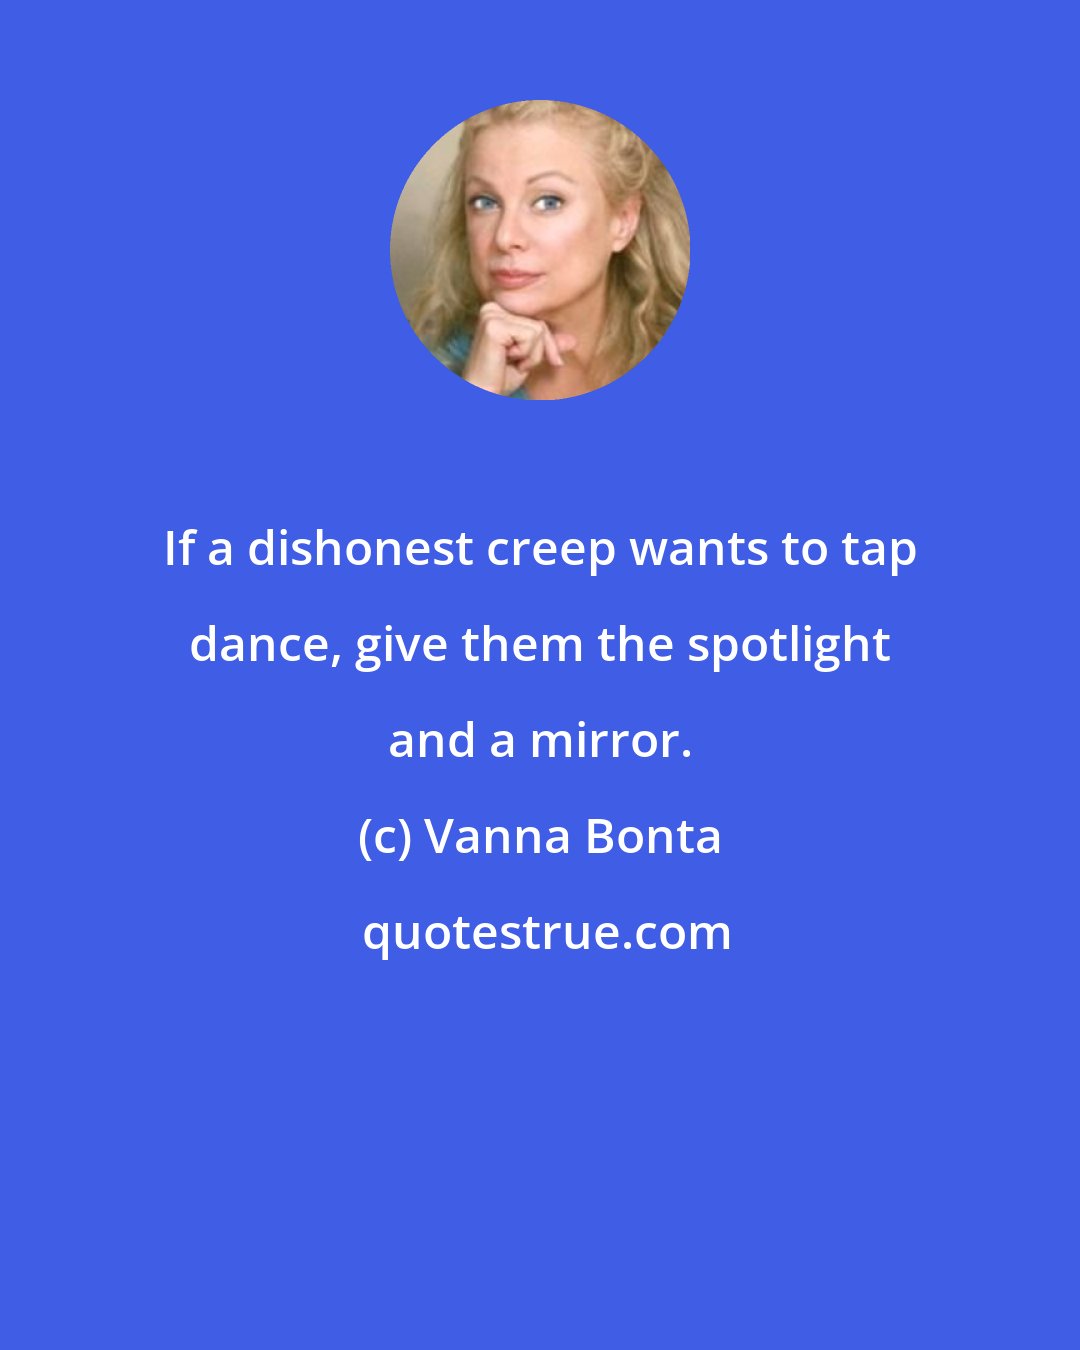 Vanna Bonta: If a dishonest creep wants to tap dance, give them the spotlight and a mirror.